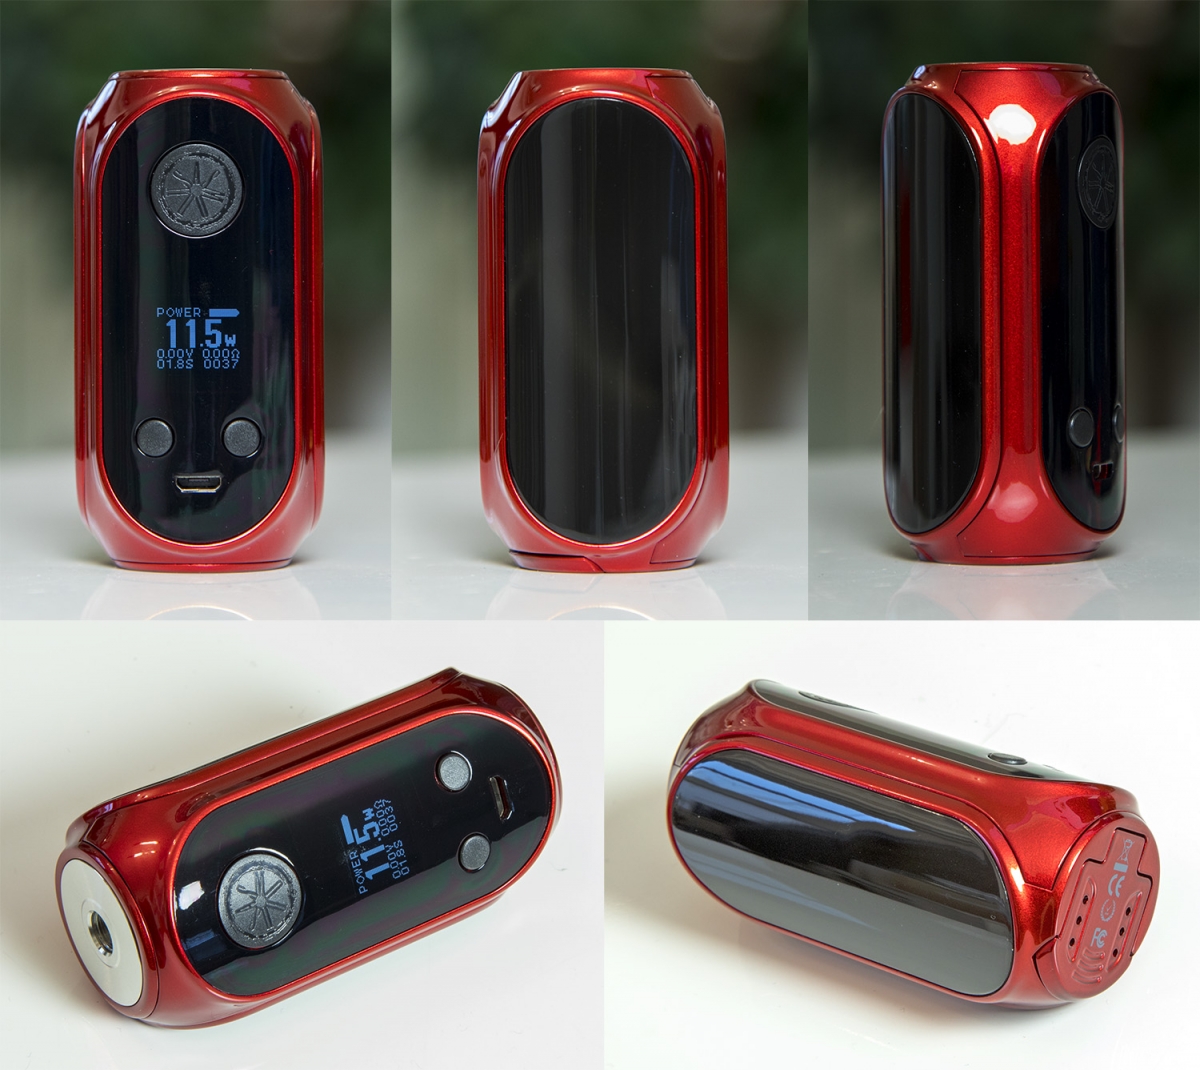 Asmodus Tribeaut TC 80W all round view